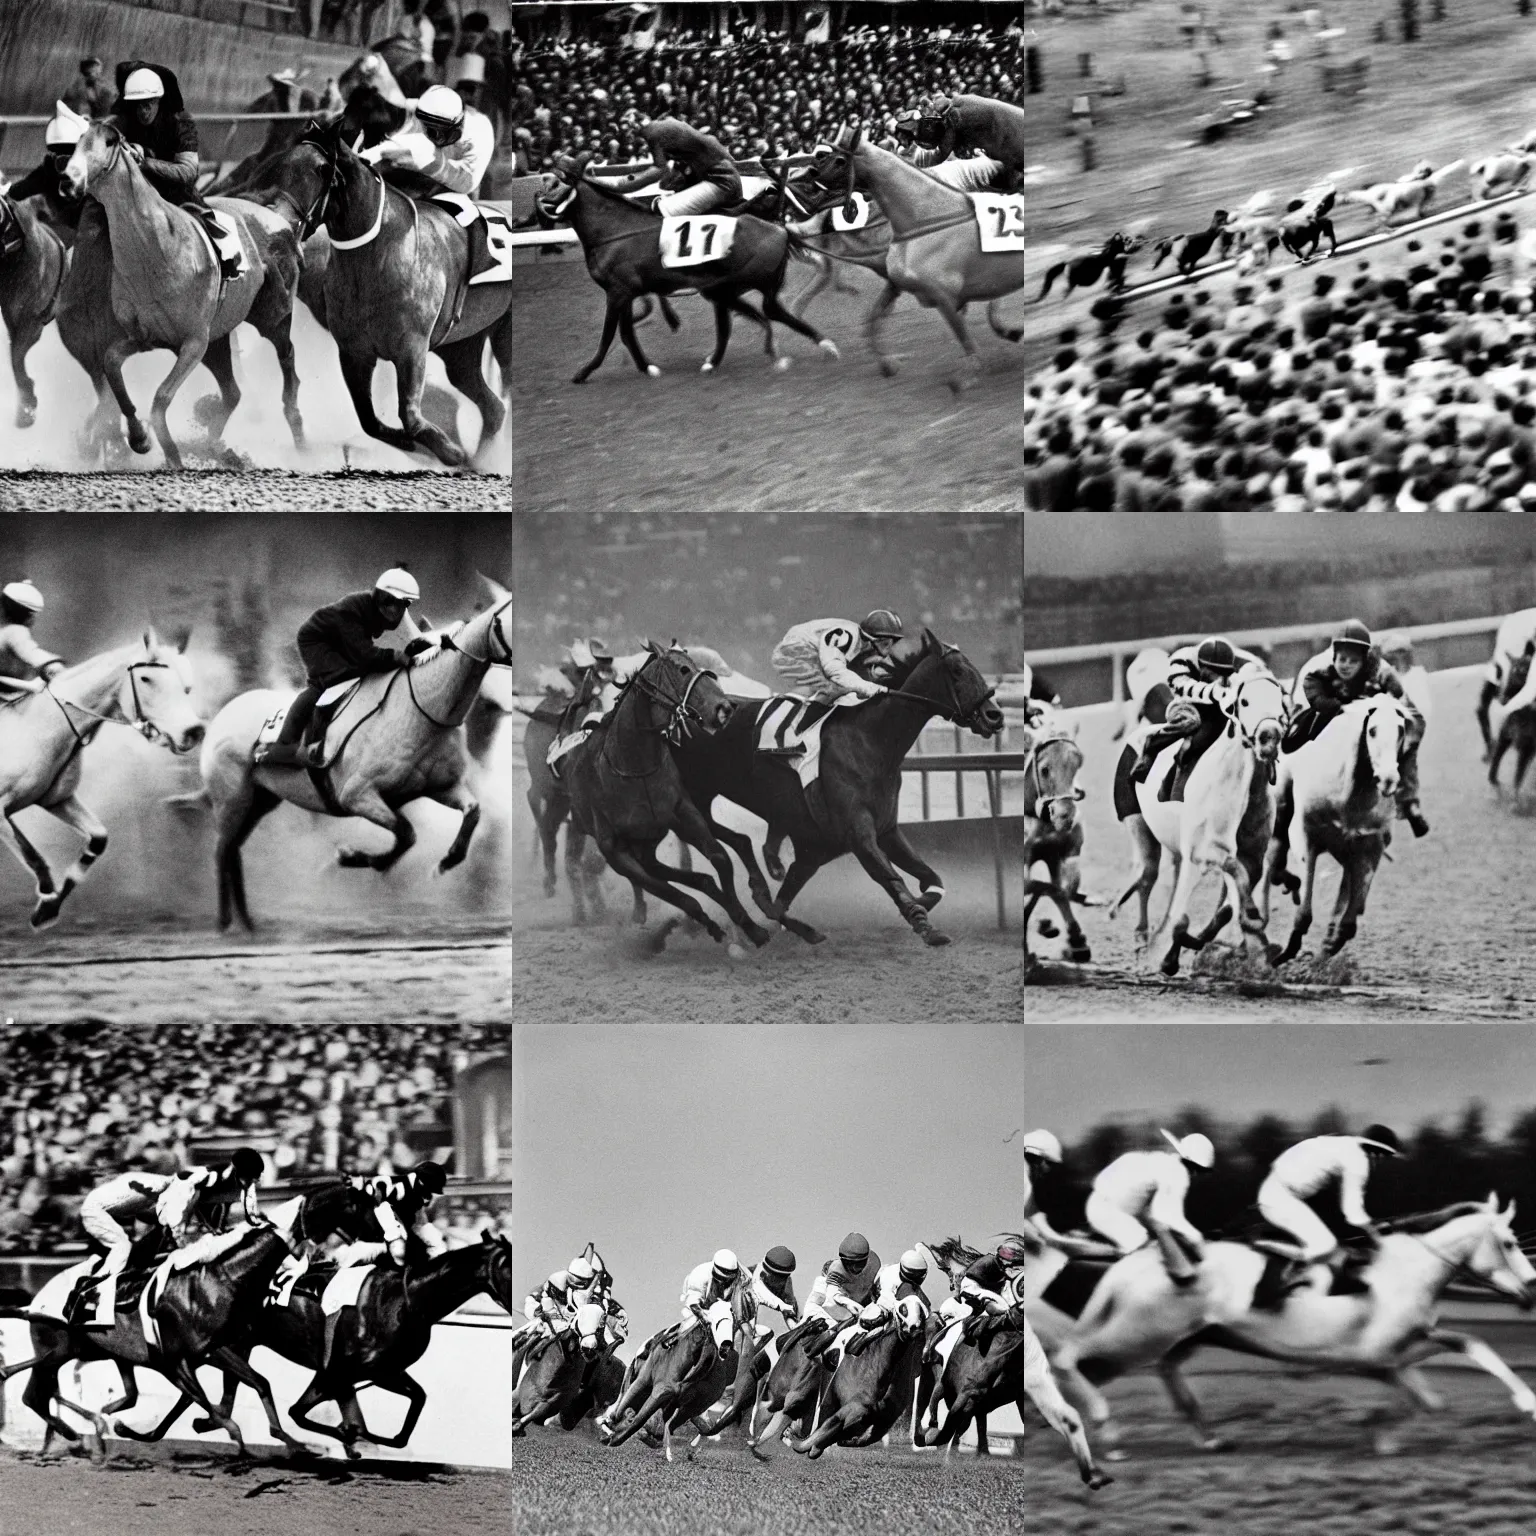 Prompt: Horse race photo by Alexander Rodchenko